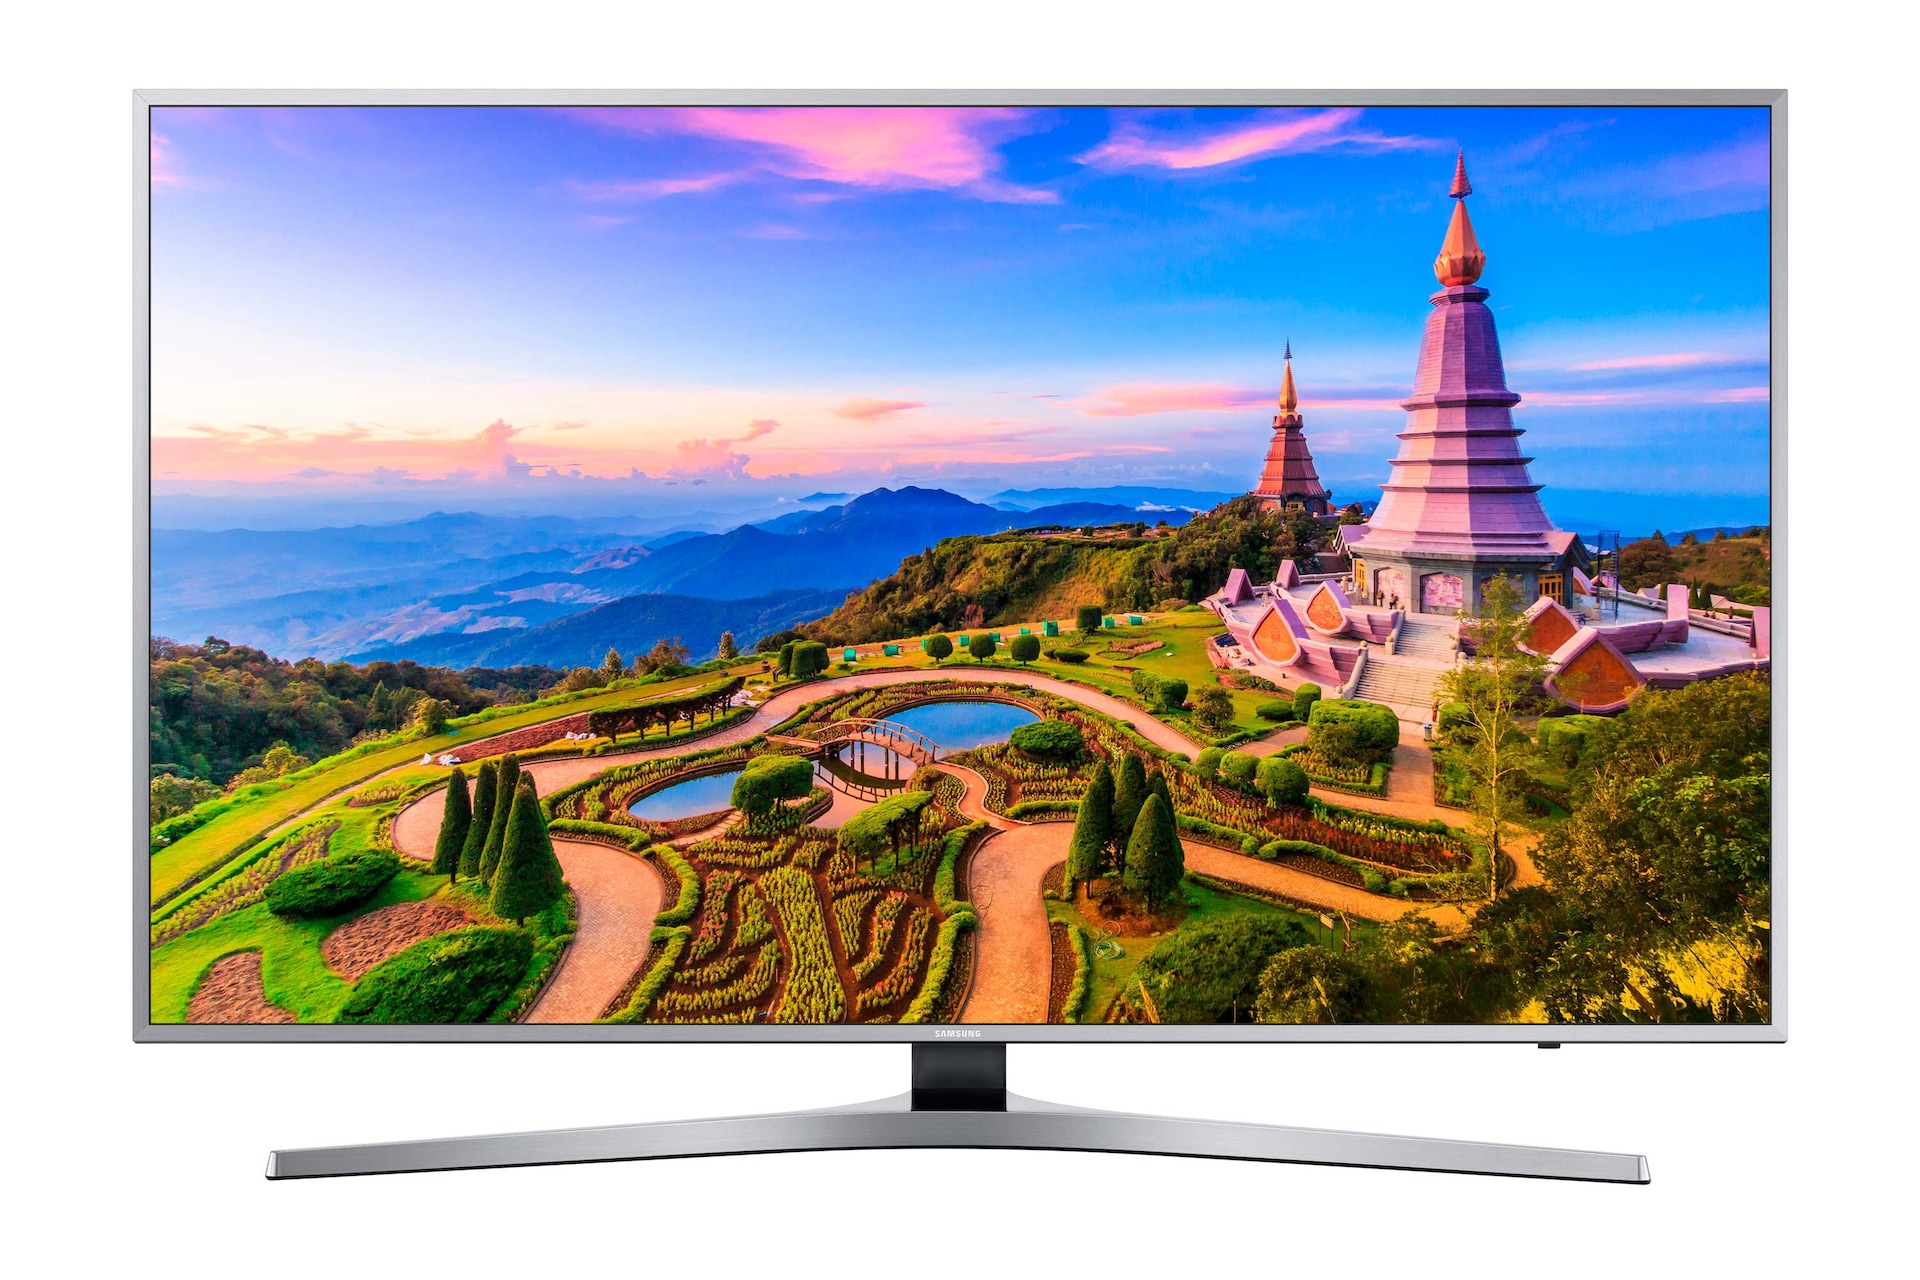 https://images.samsung.com/is/image/samsung/es-uhdtv-mu6400-ue40mu6405uxxc-silver-Silver-61687514?$650_519_PNG$